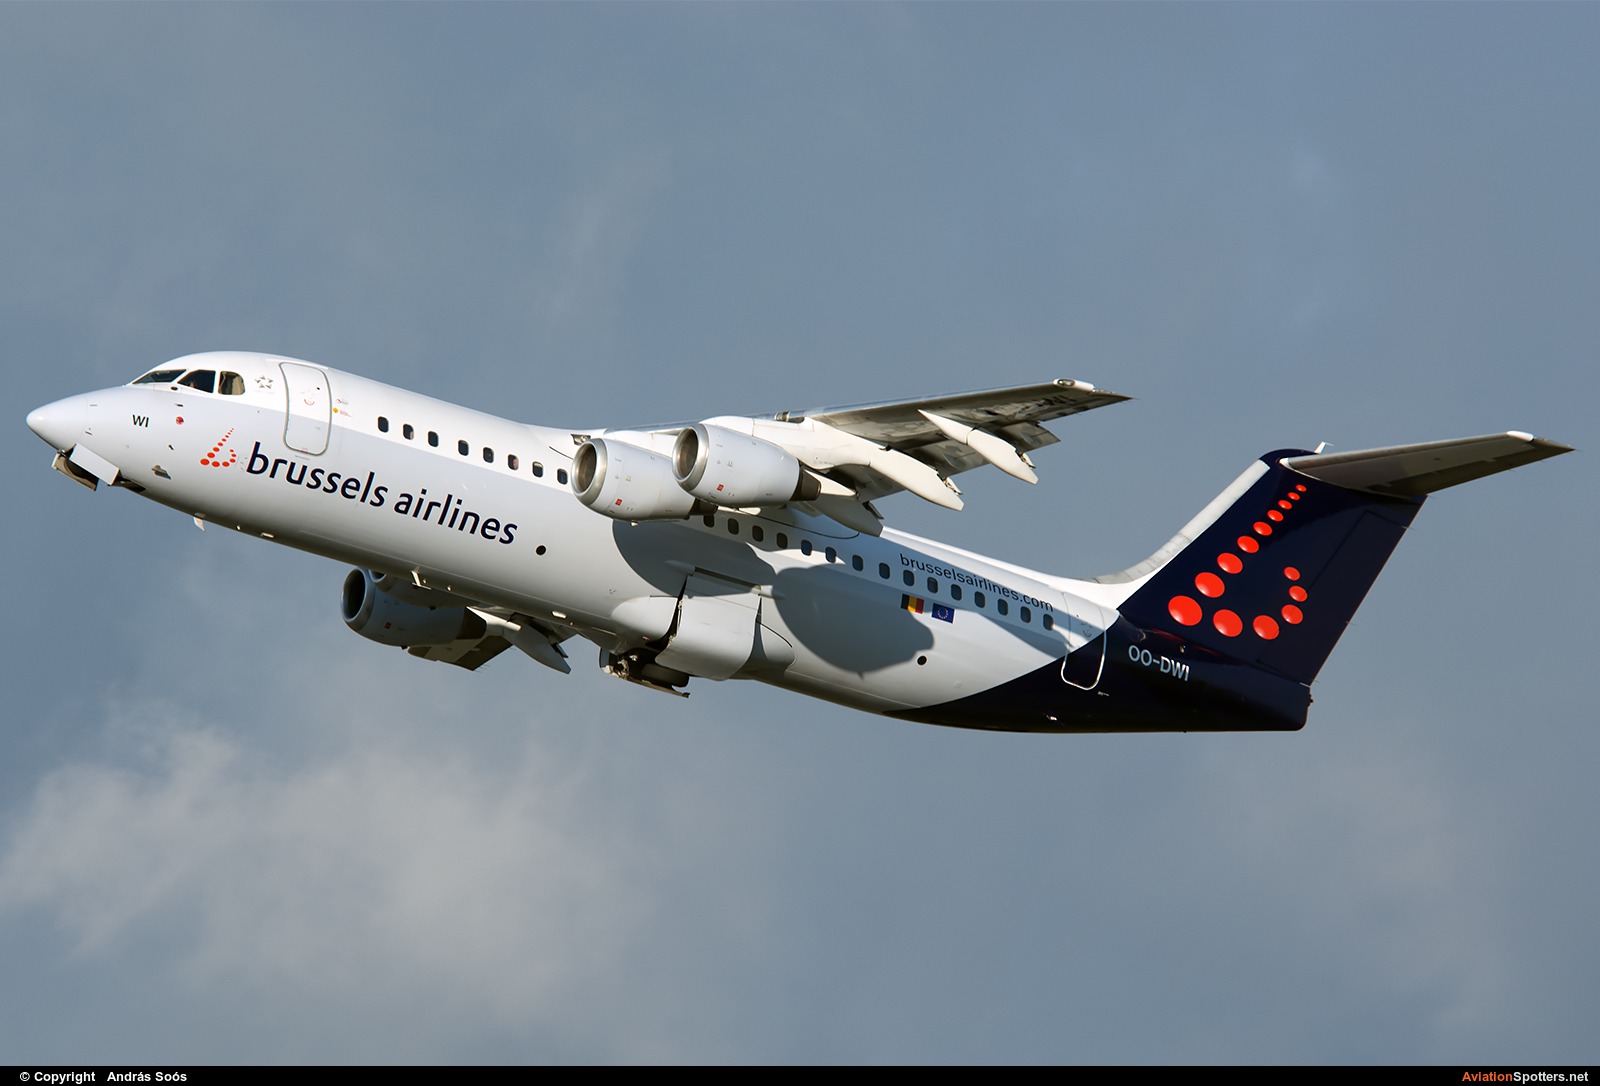 Brussels Airlines  -  BAe 146-300-Avro RJ100  (OO-DWI) By András Soós (sas1965)